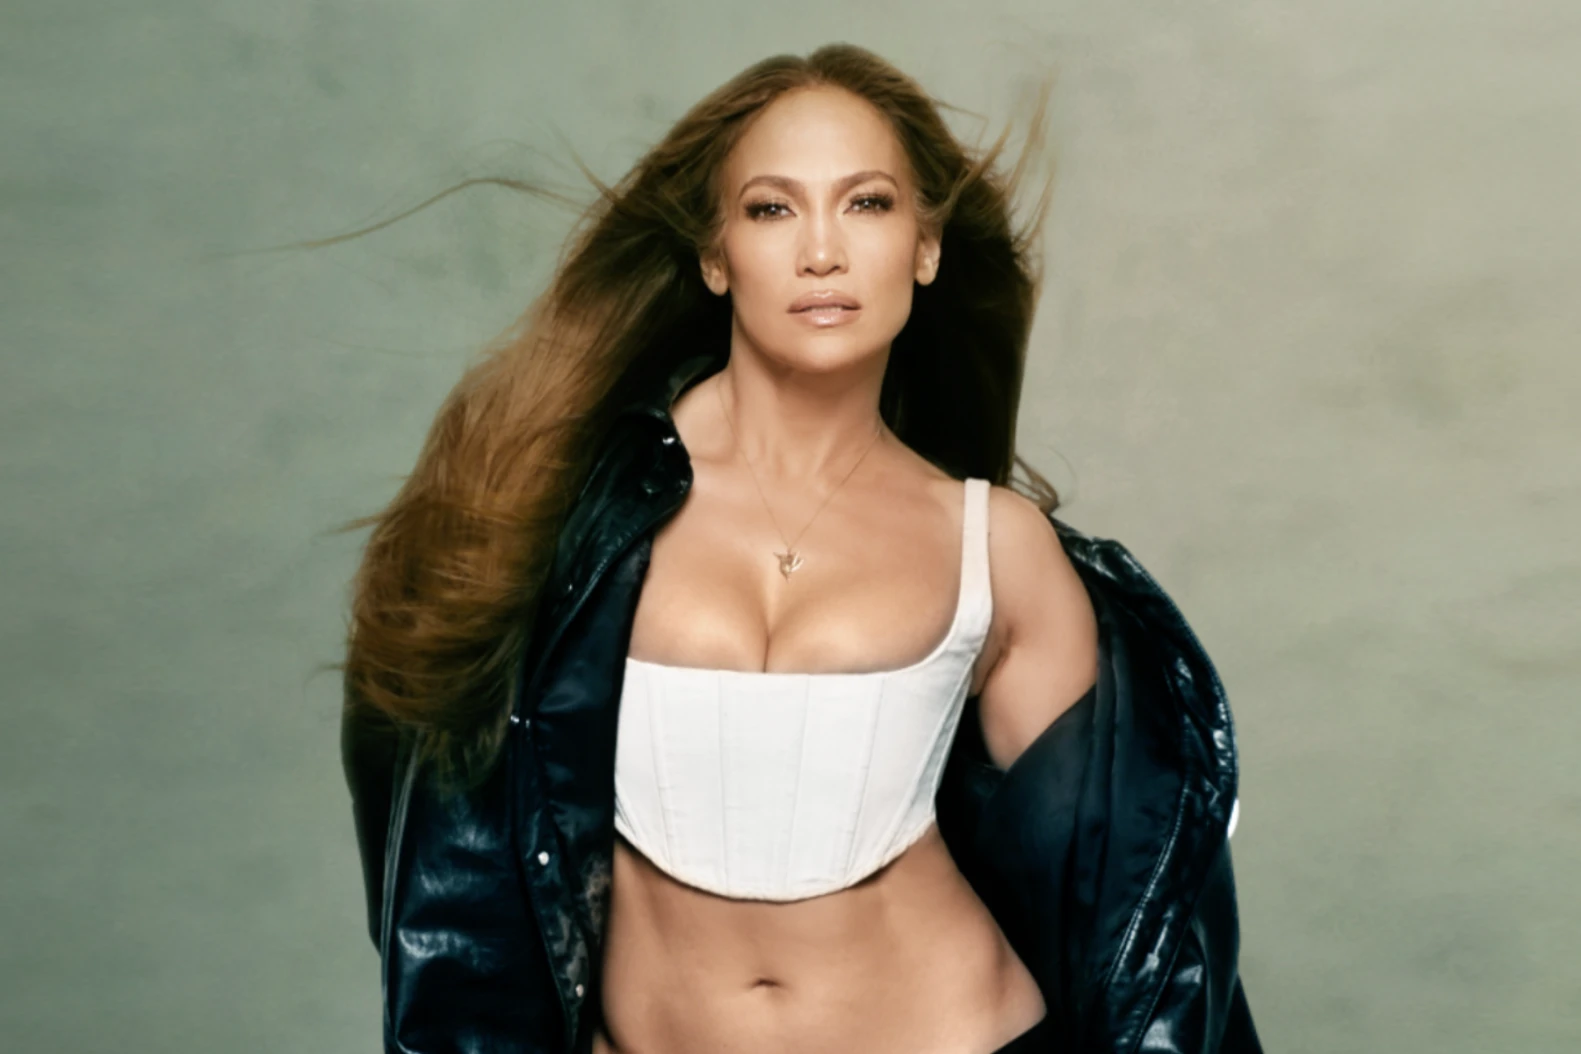 Jennifer Lopez on the cover of her album "This Is Me... Now"